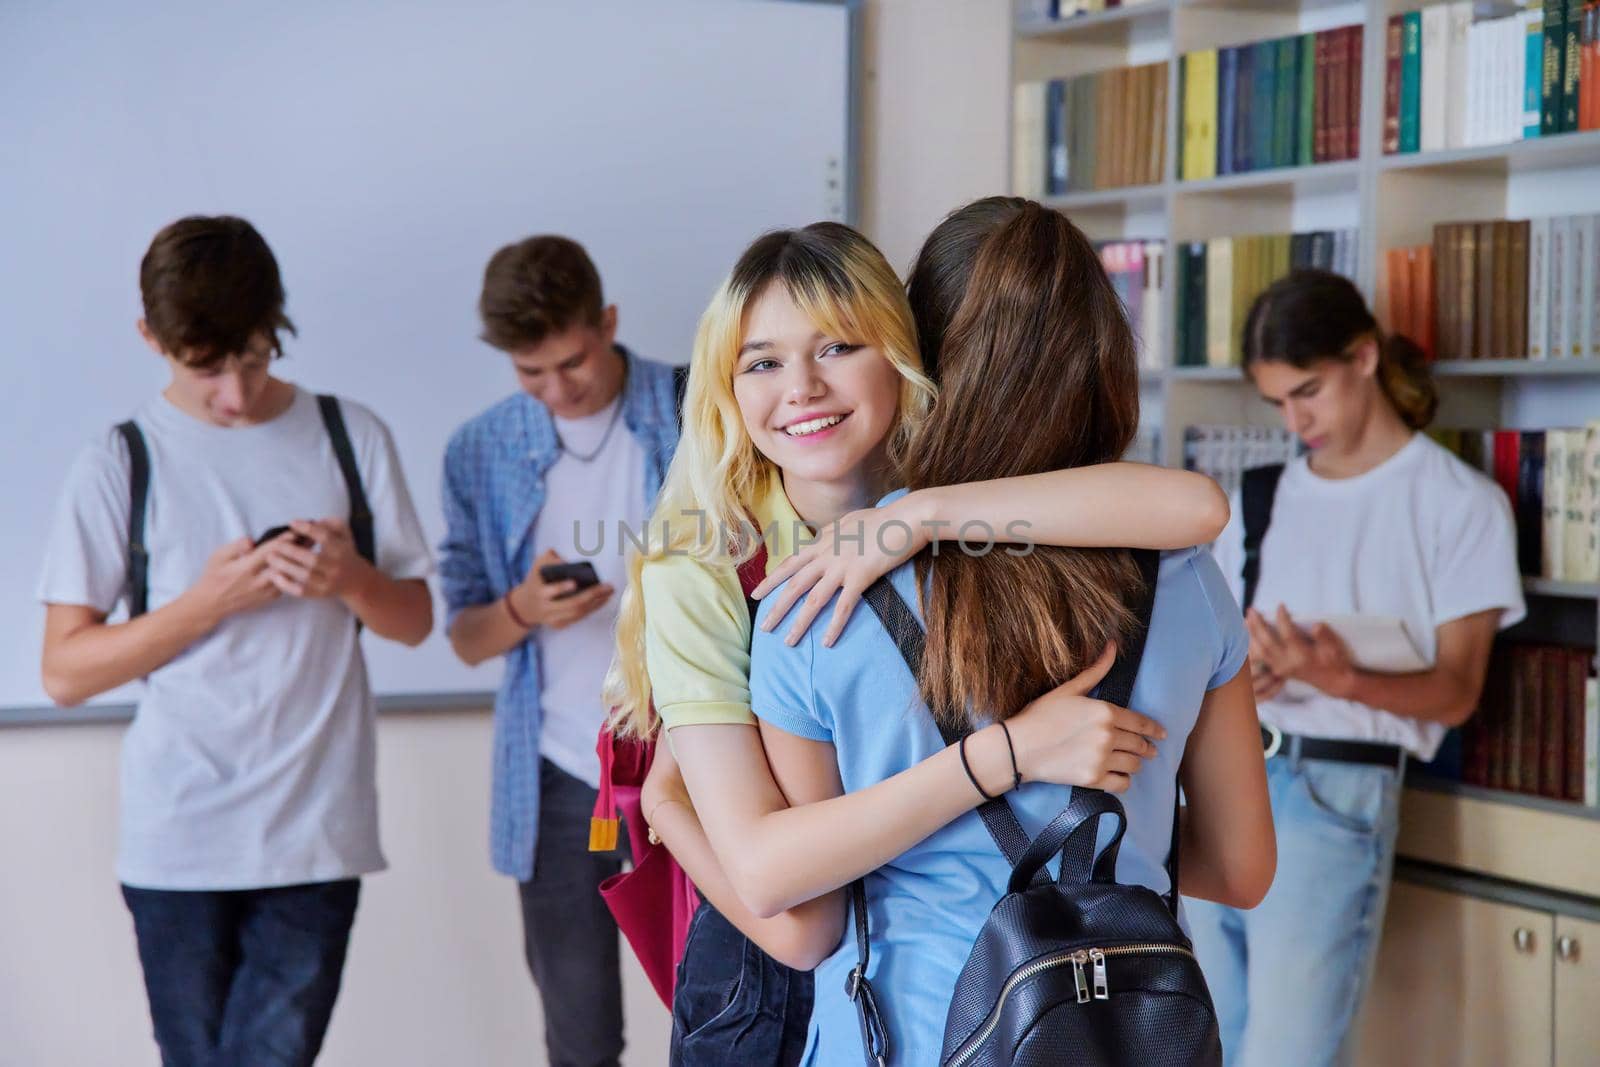 Back to school, to college. Two school girlfriends teenagers are welcome, meeting, smiling, rejoicing. Library classroom schoolroom interior. Adolescence, lifestyle, communication, friendship concept